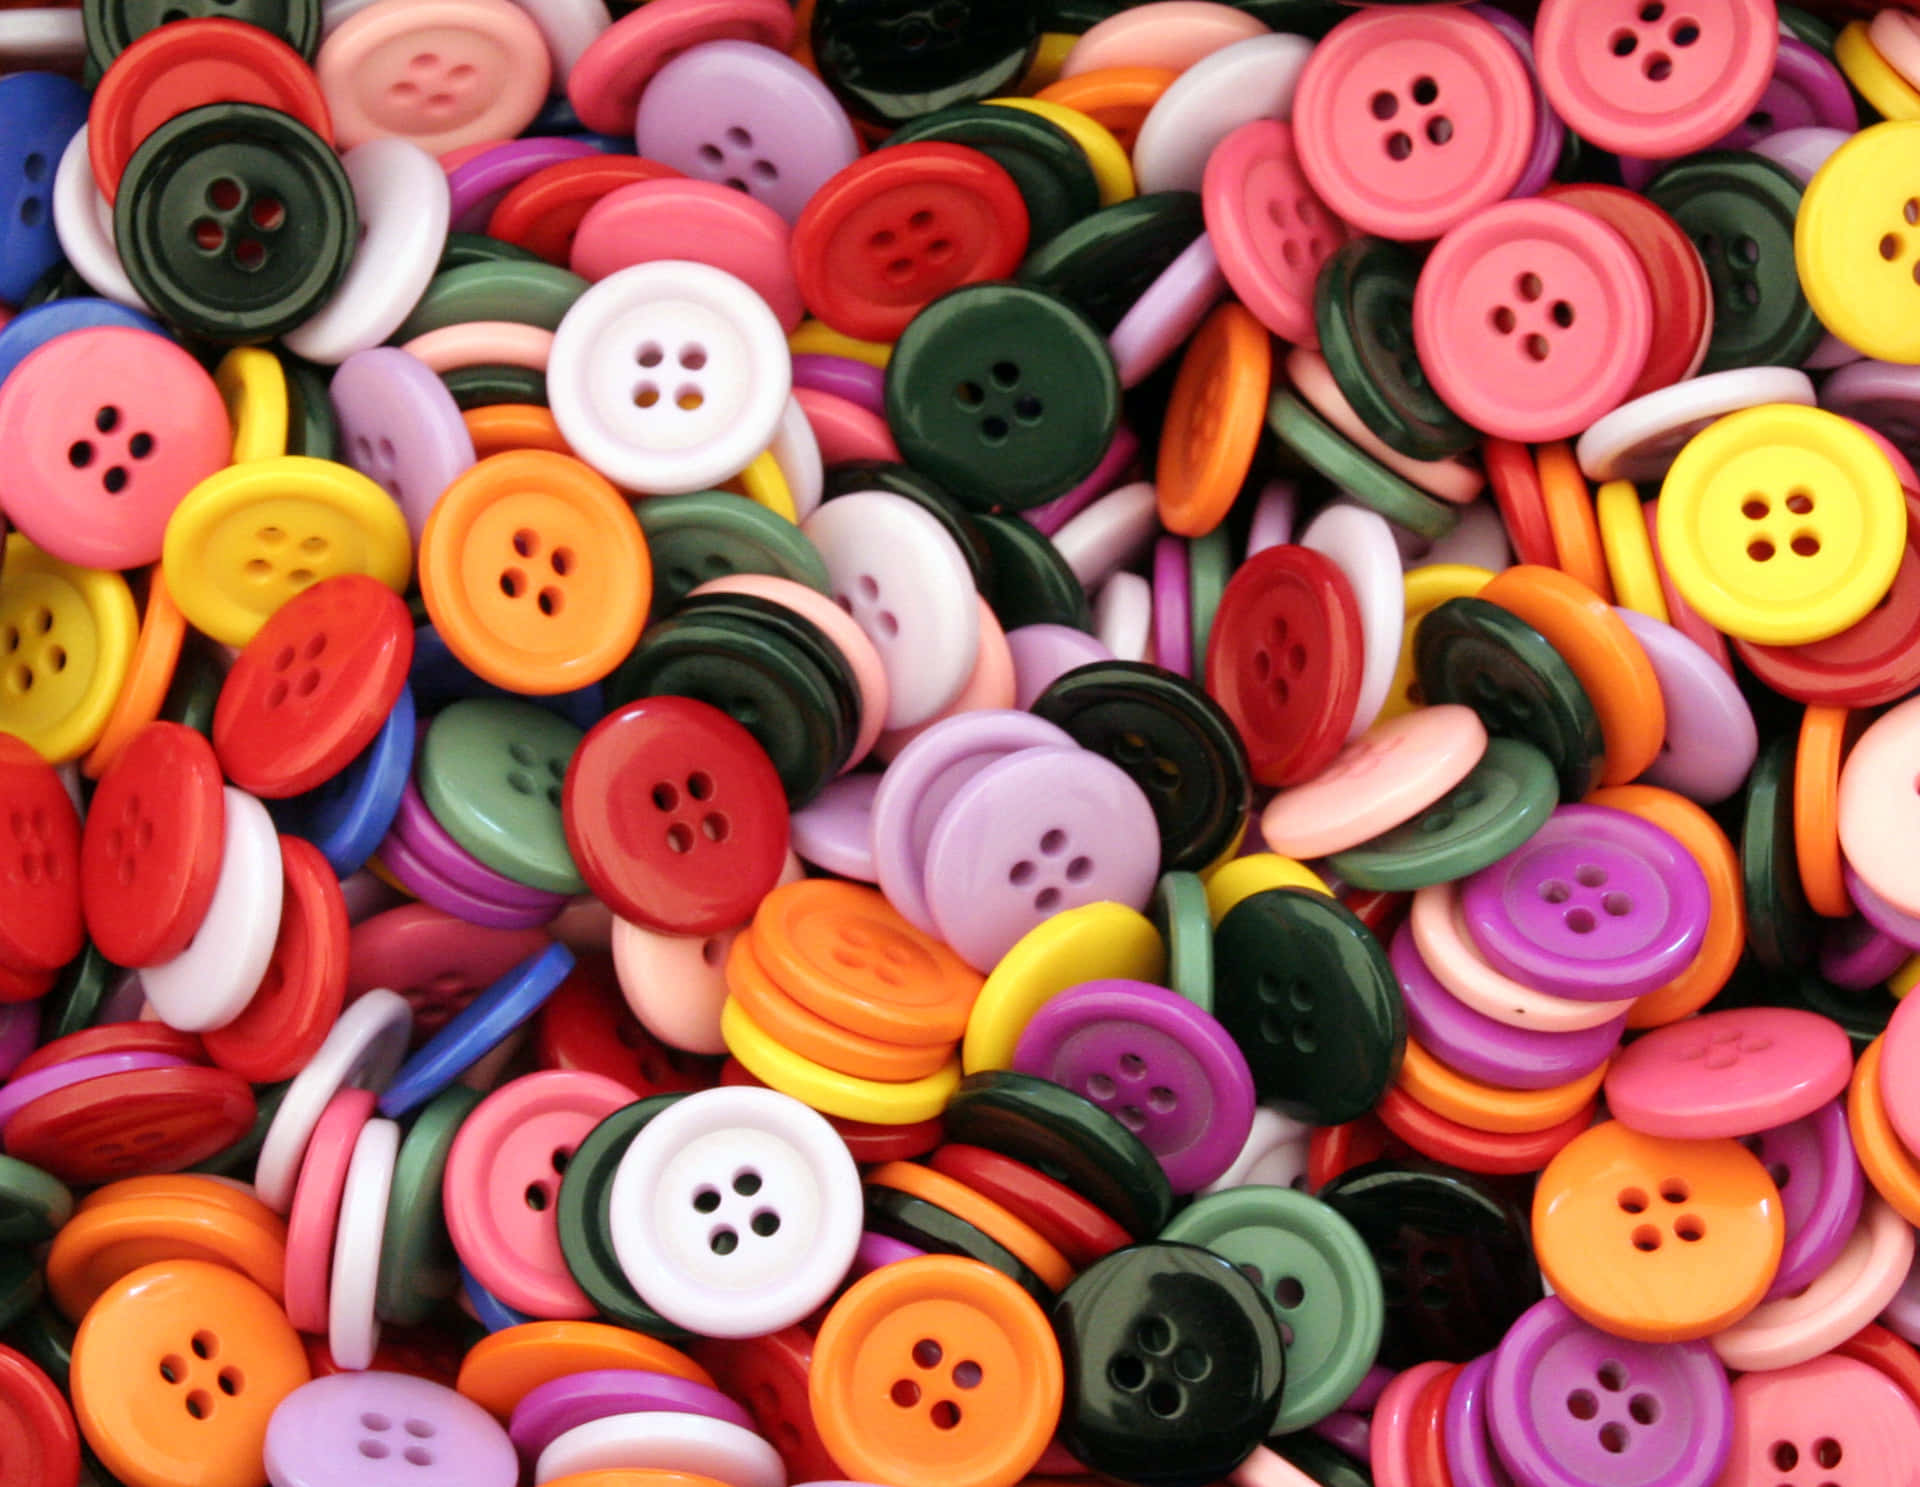 A Pile Of Colorful Buttons